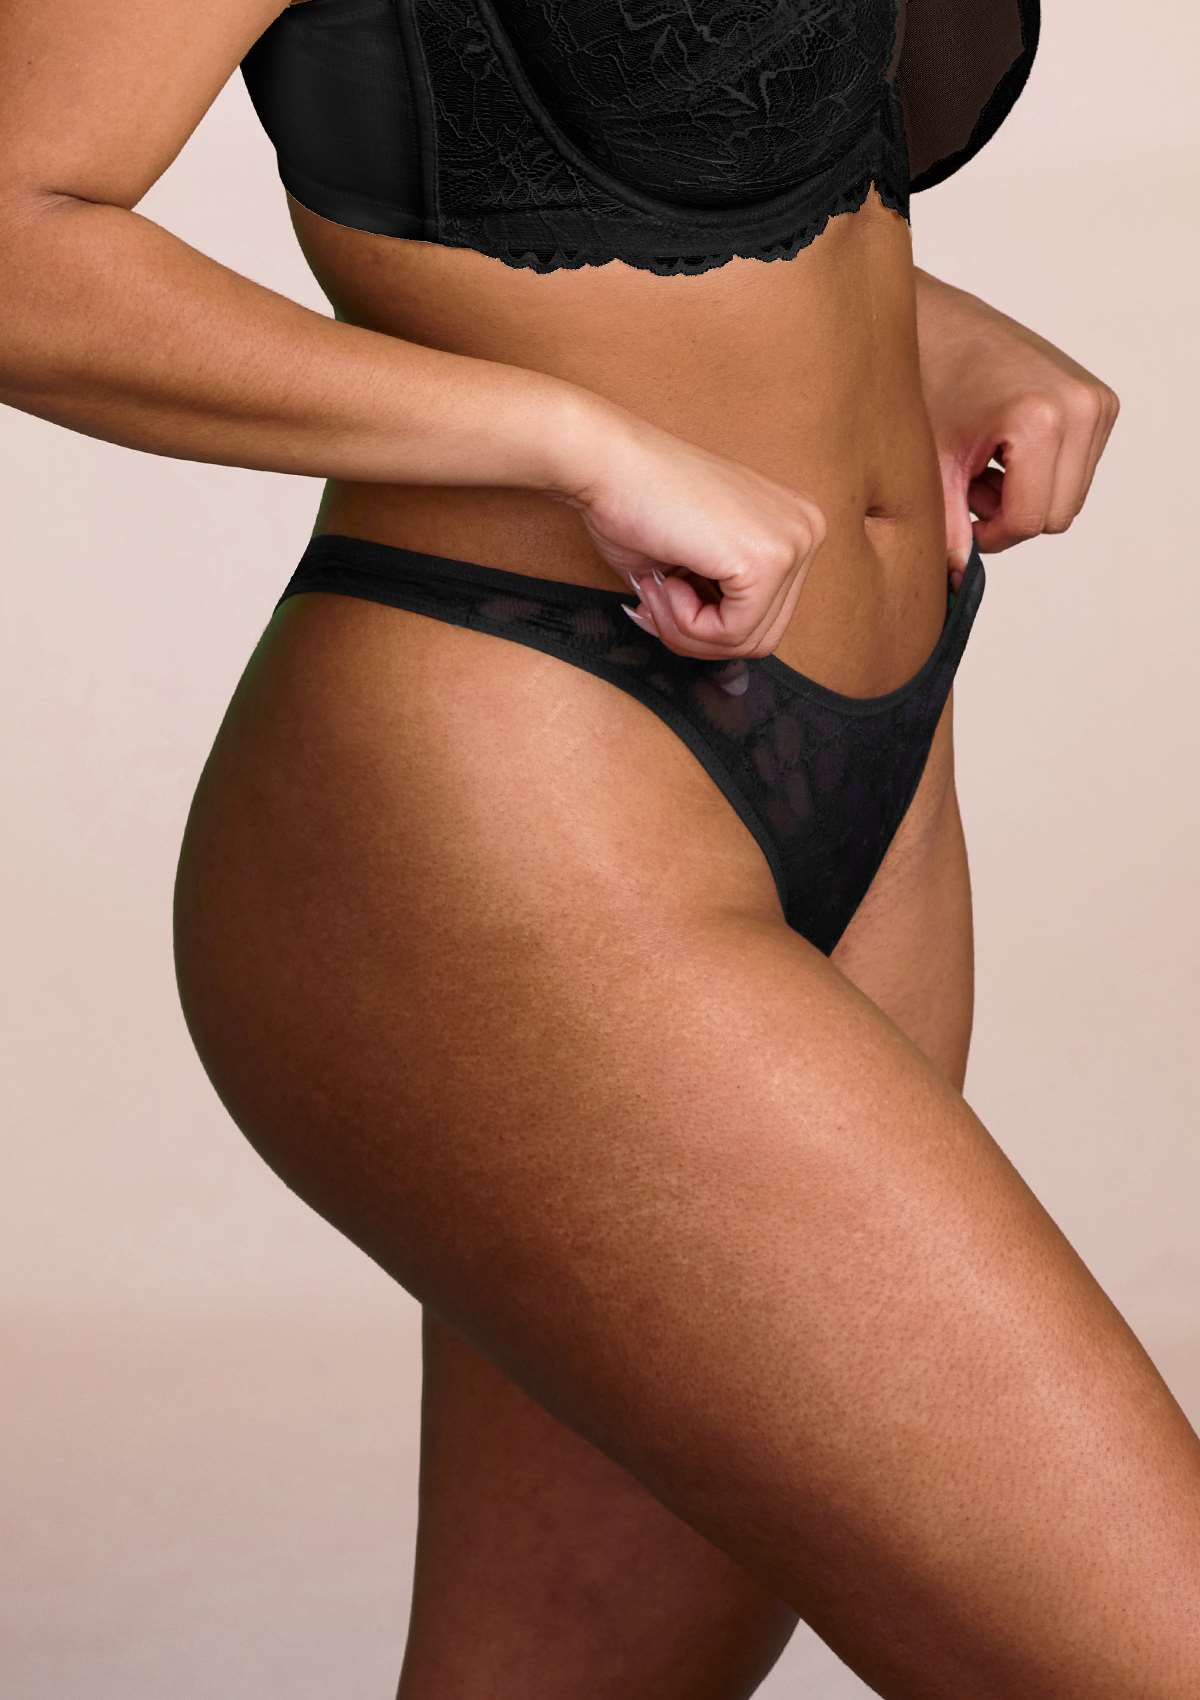 HSIA Soft Sexy Mesh Thong Underwear 3 Pack - XL / Black+White+Light Coral